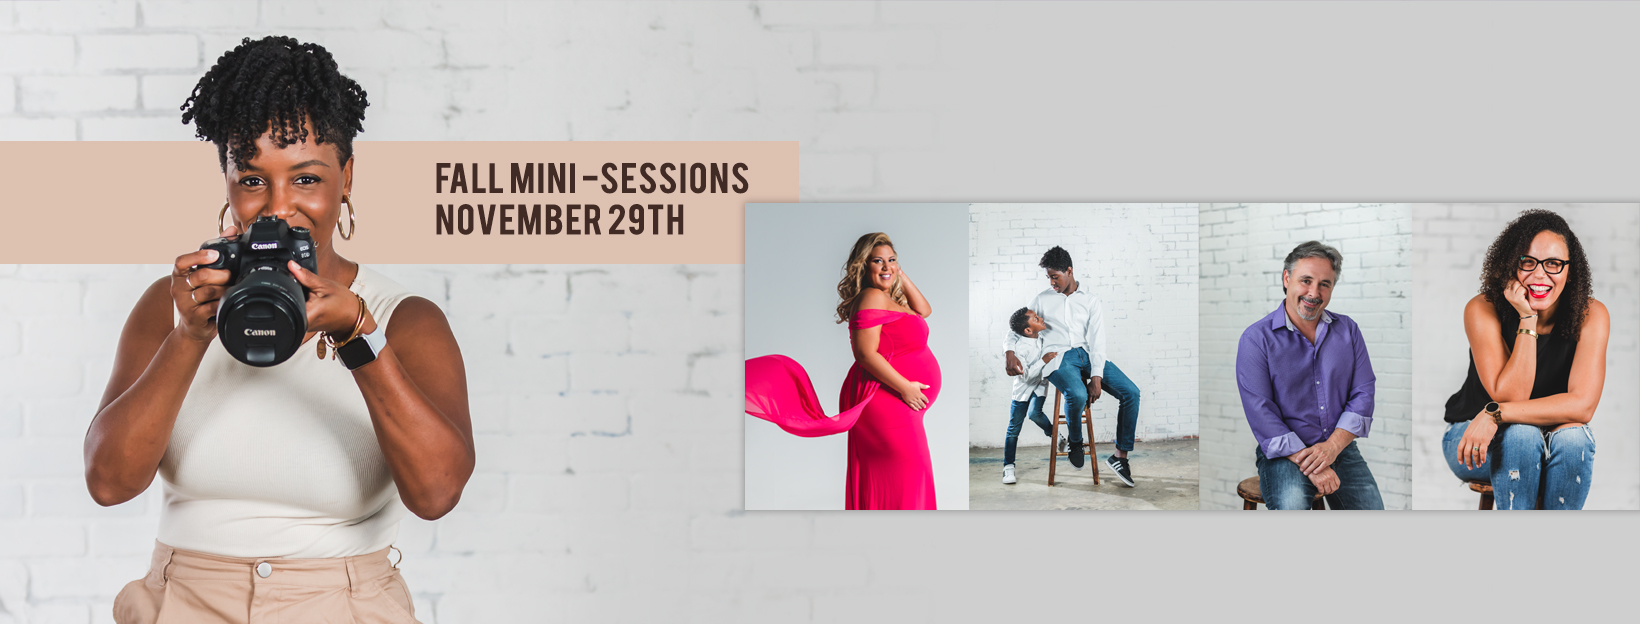 Fall Mini Sessions Are Here!